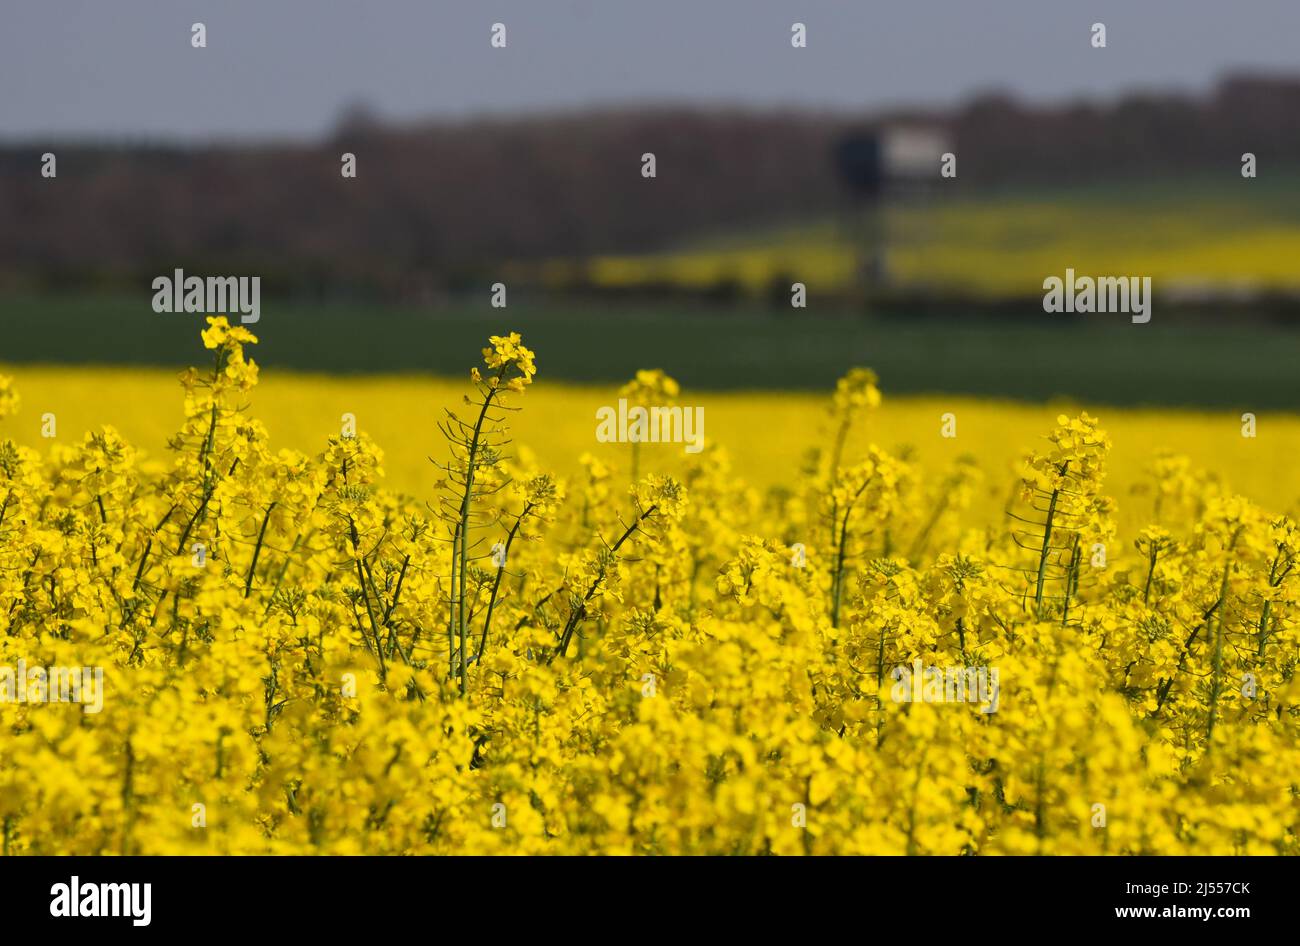 Oil seed rape flowers against a beautiful rural farm scape in the United Kingdom Stock Photo